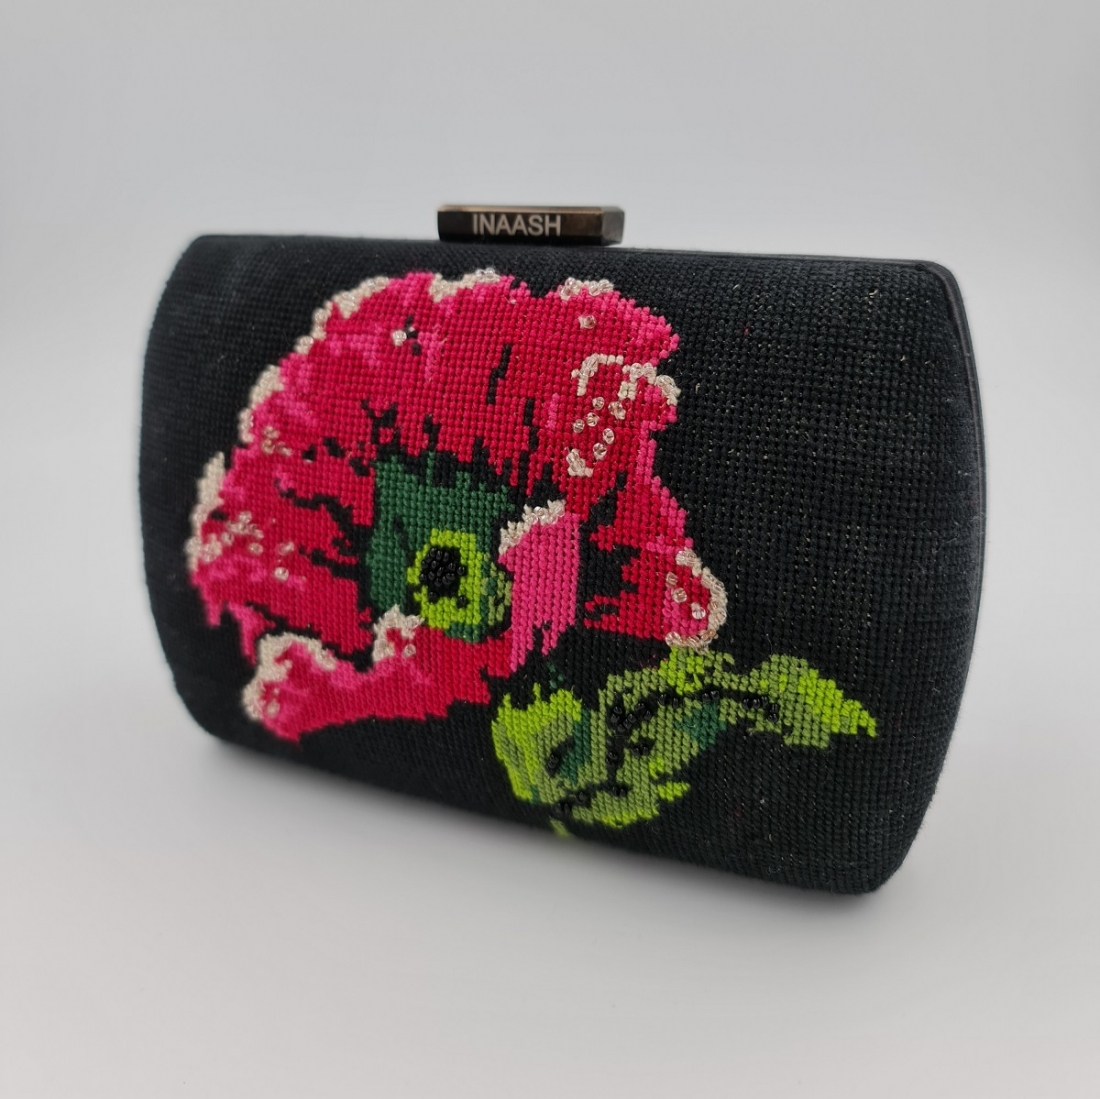 Palestinian Poppy Embroidered Clutch